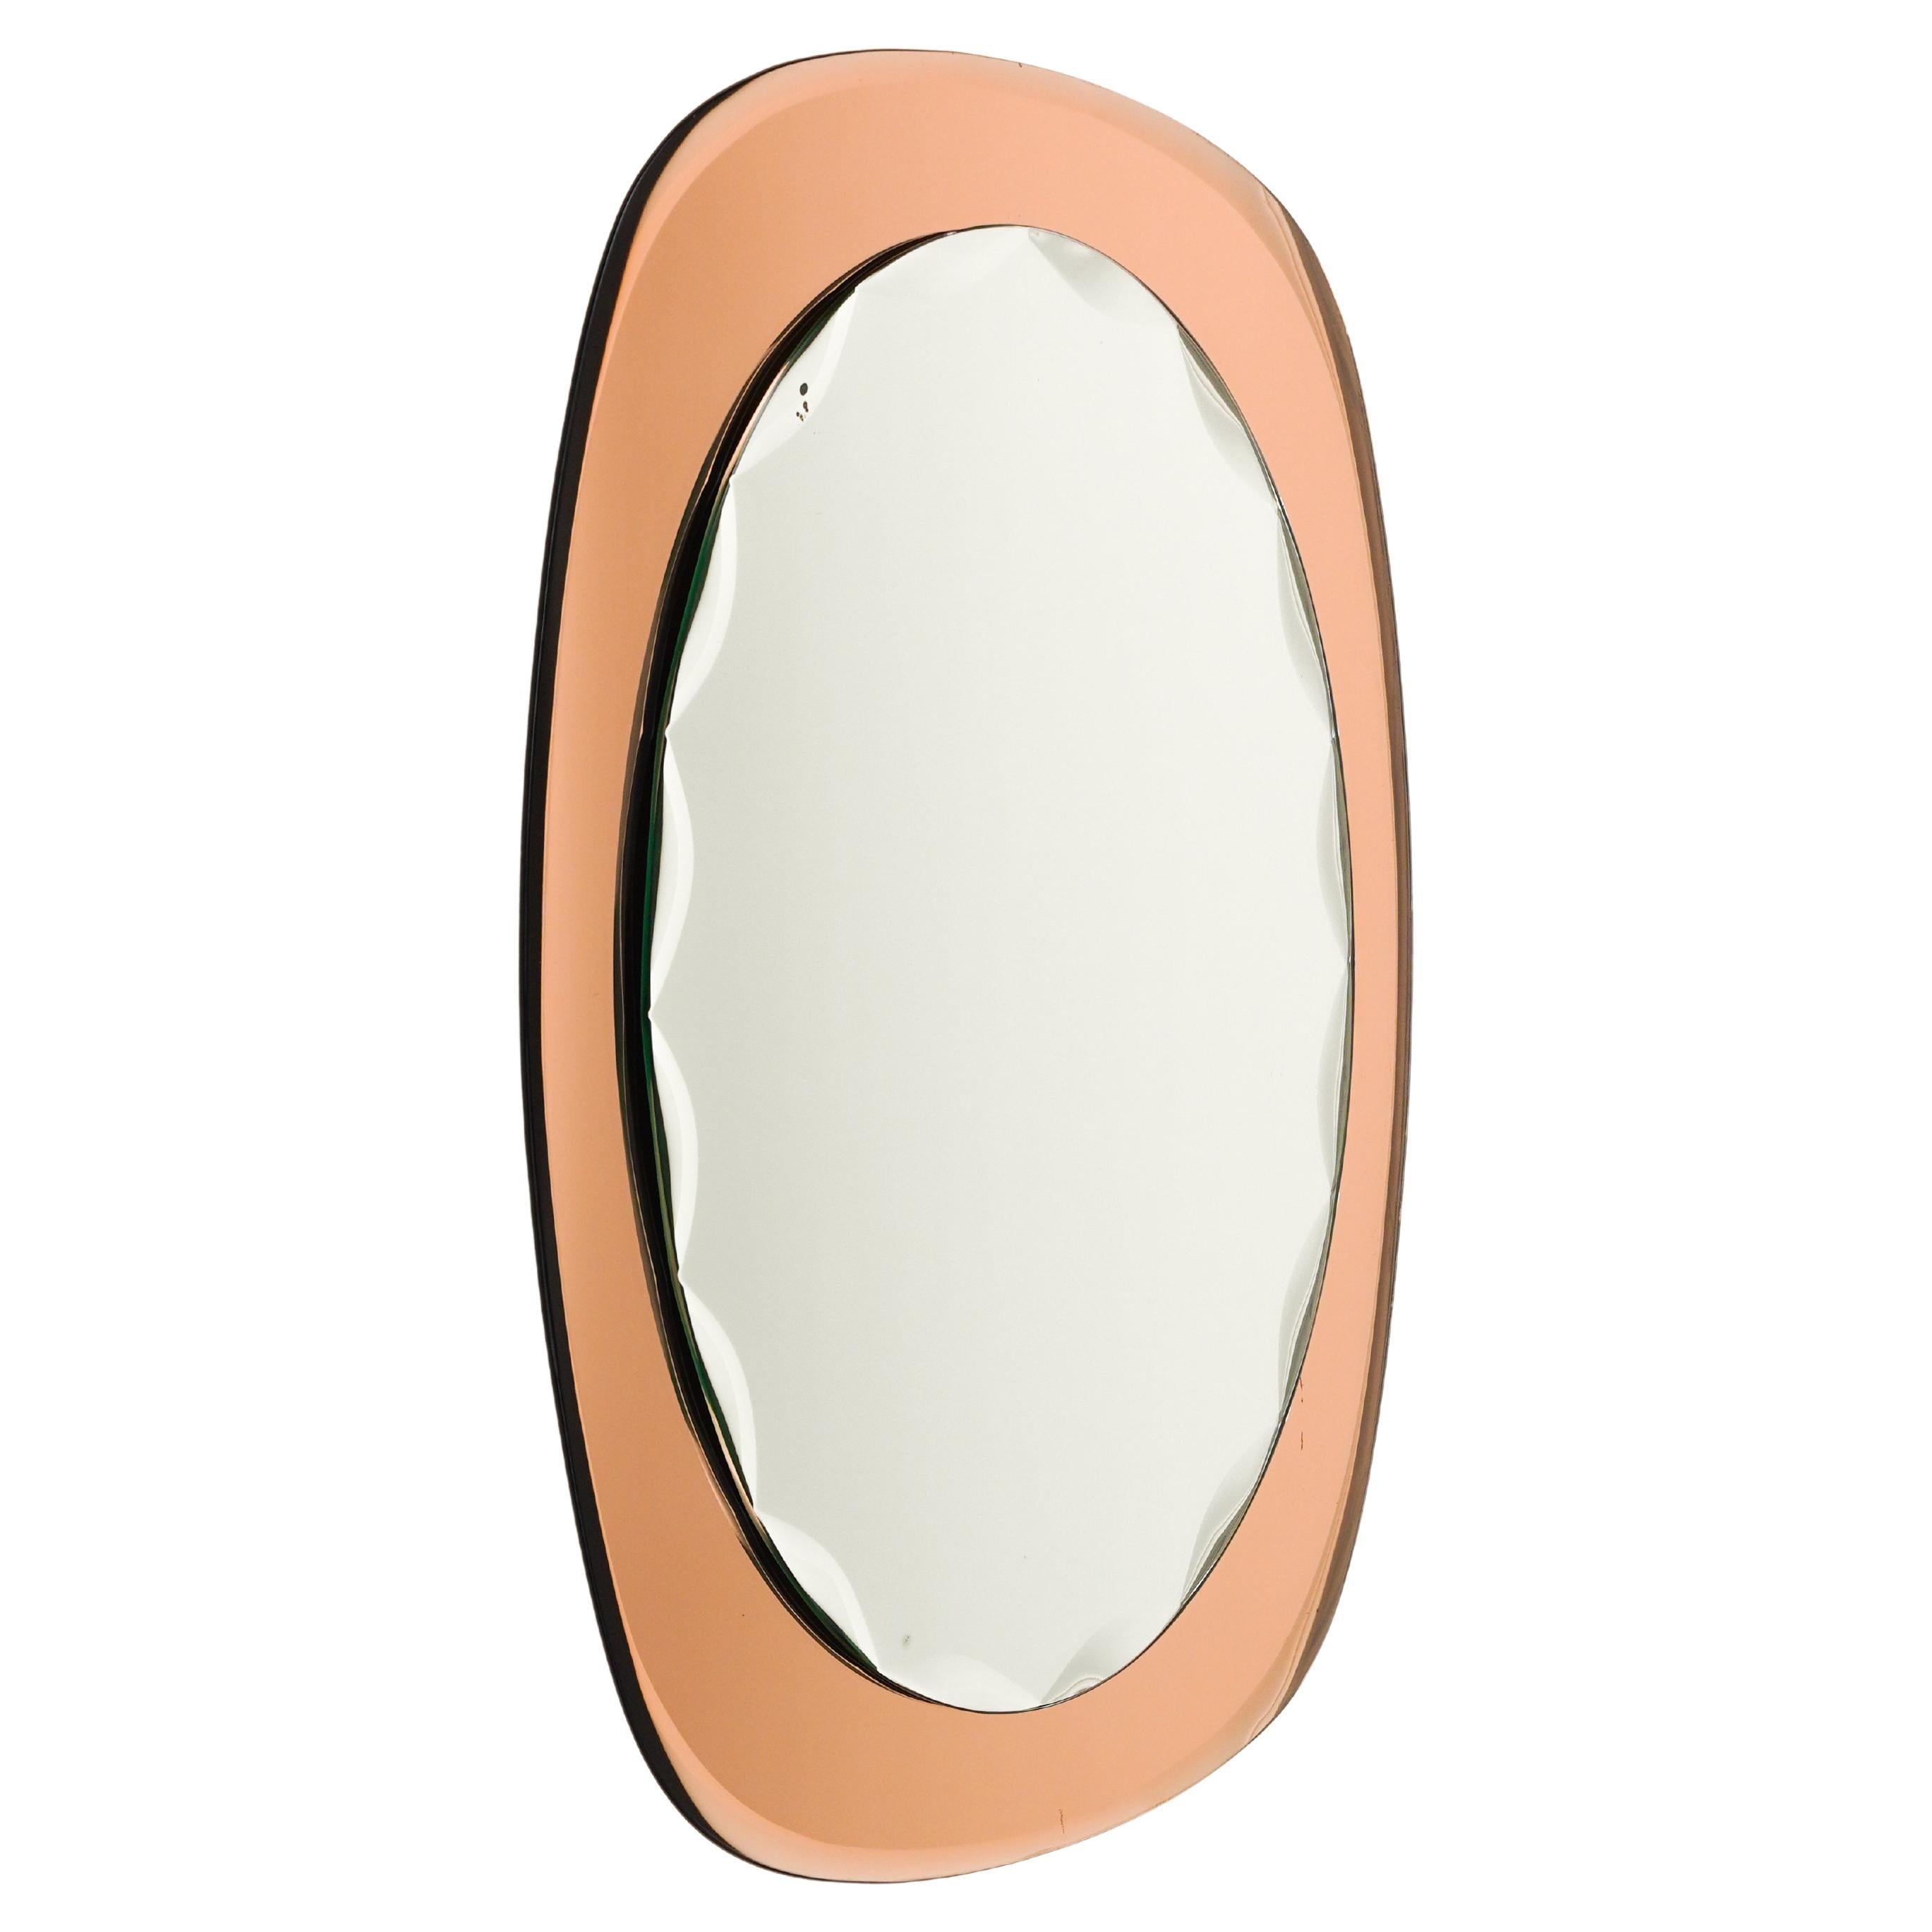 Midcentury Oval Wall Mirror rose gold Glass Frame by Cristal Arte, Italy 1960s For Sale